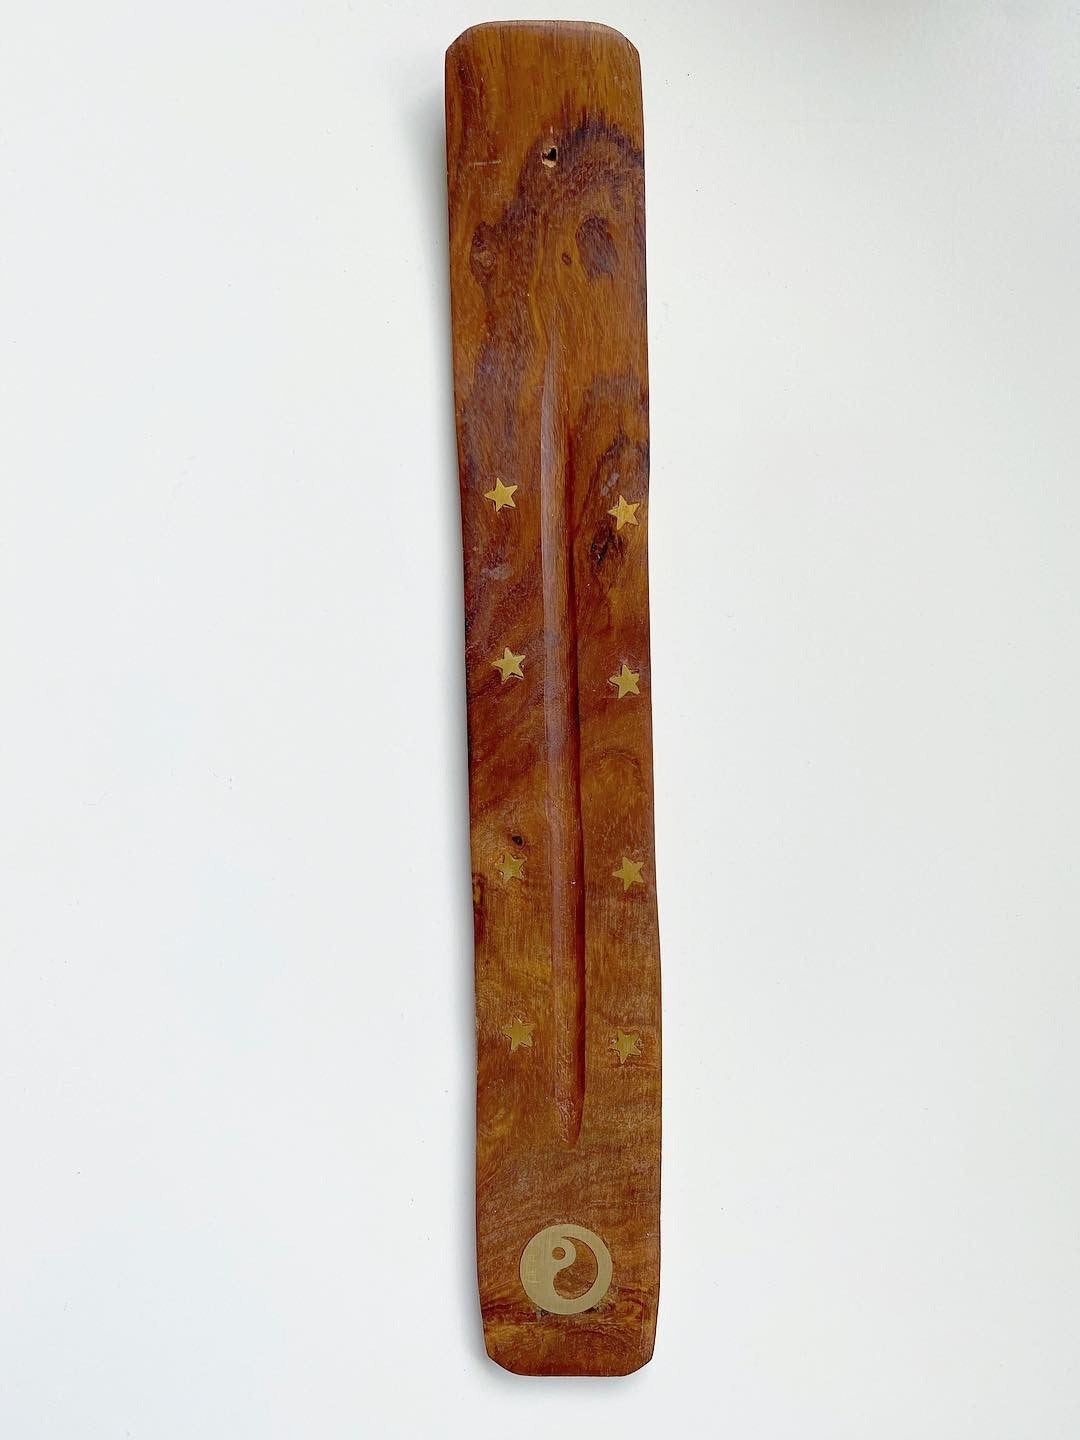 Wooden Incense Stick Holder with Yin Yang Inlay Design